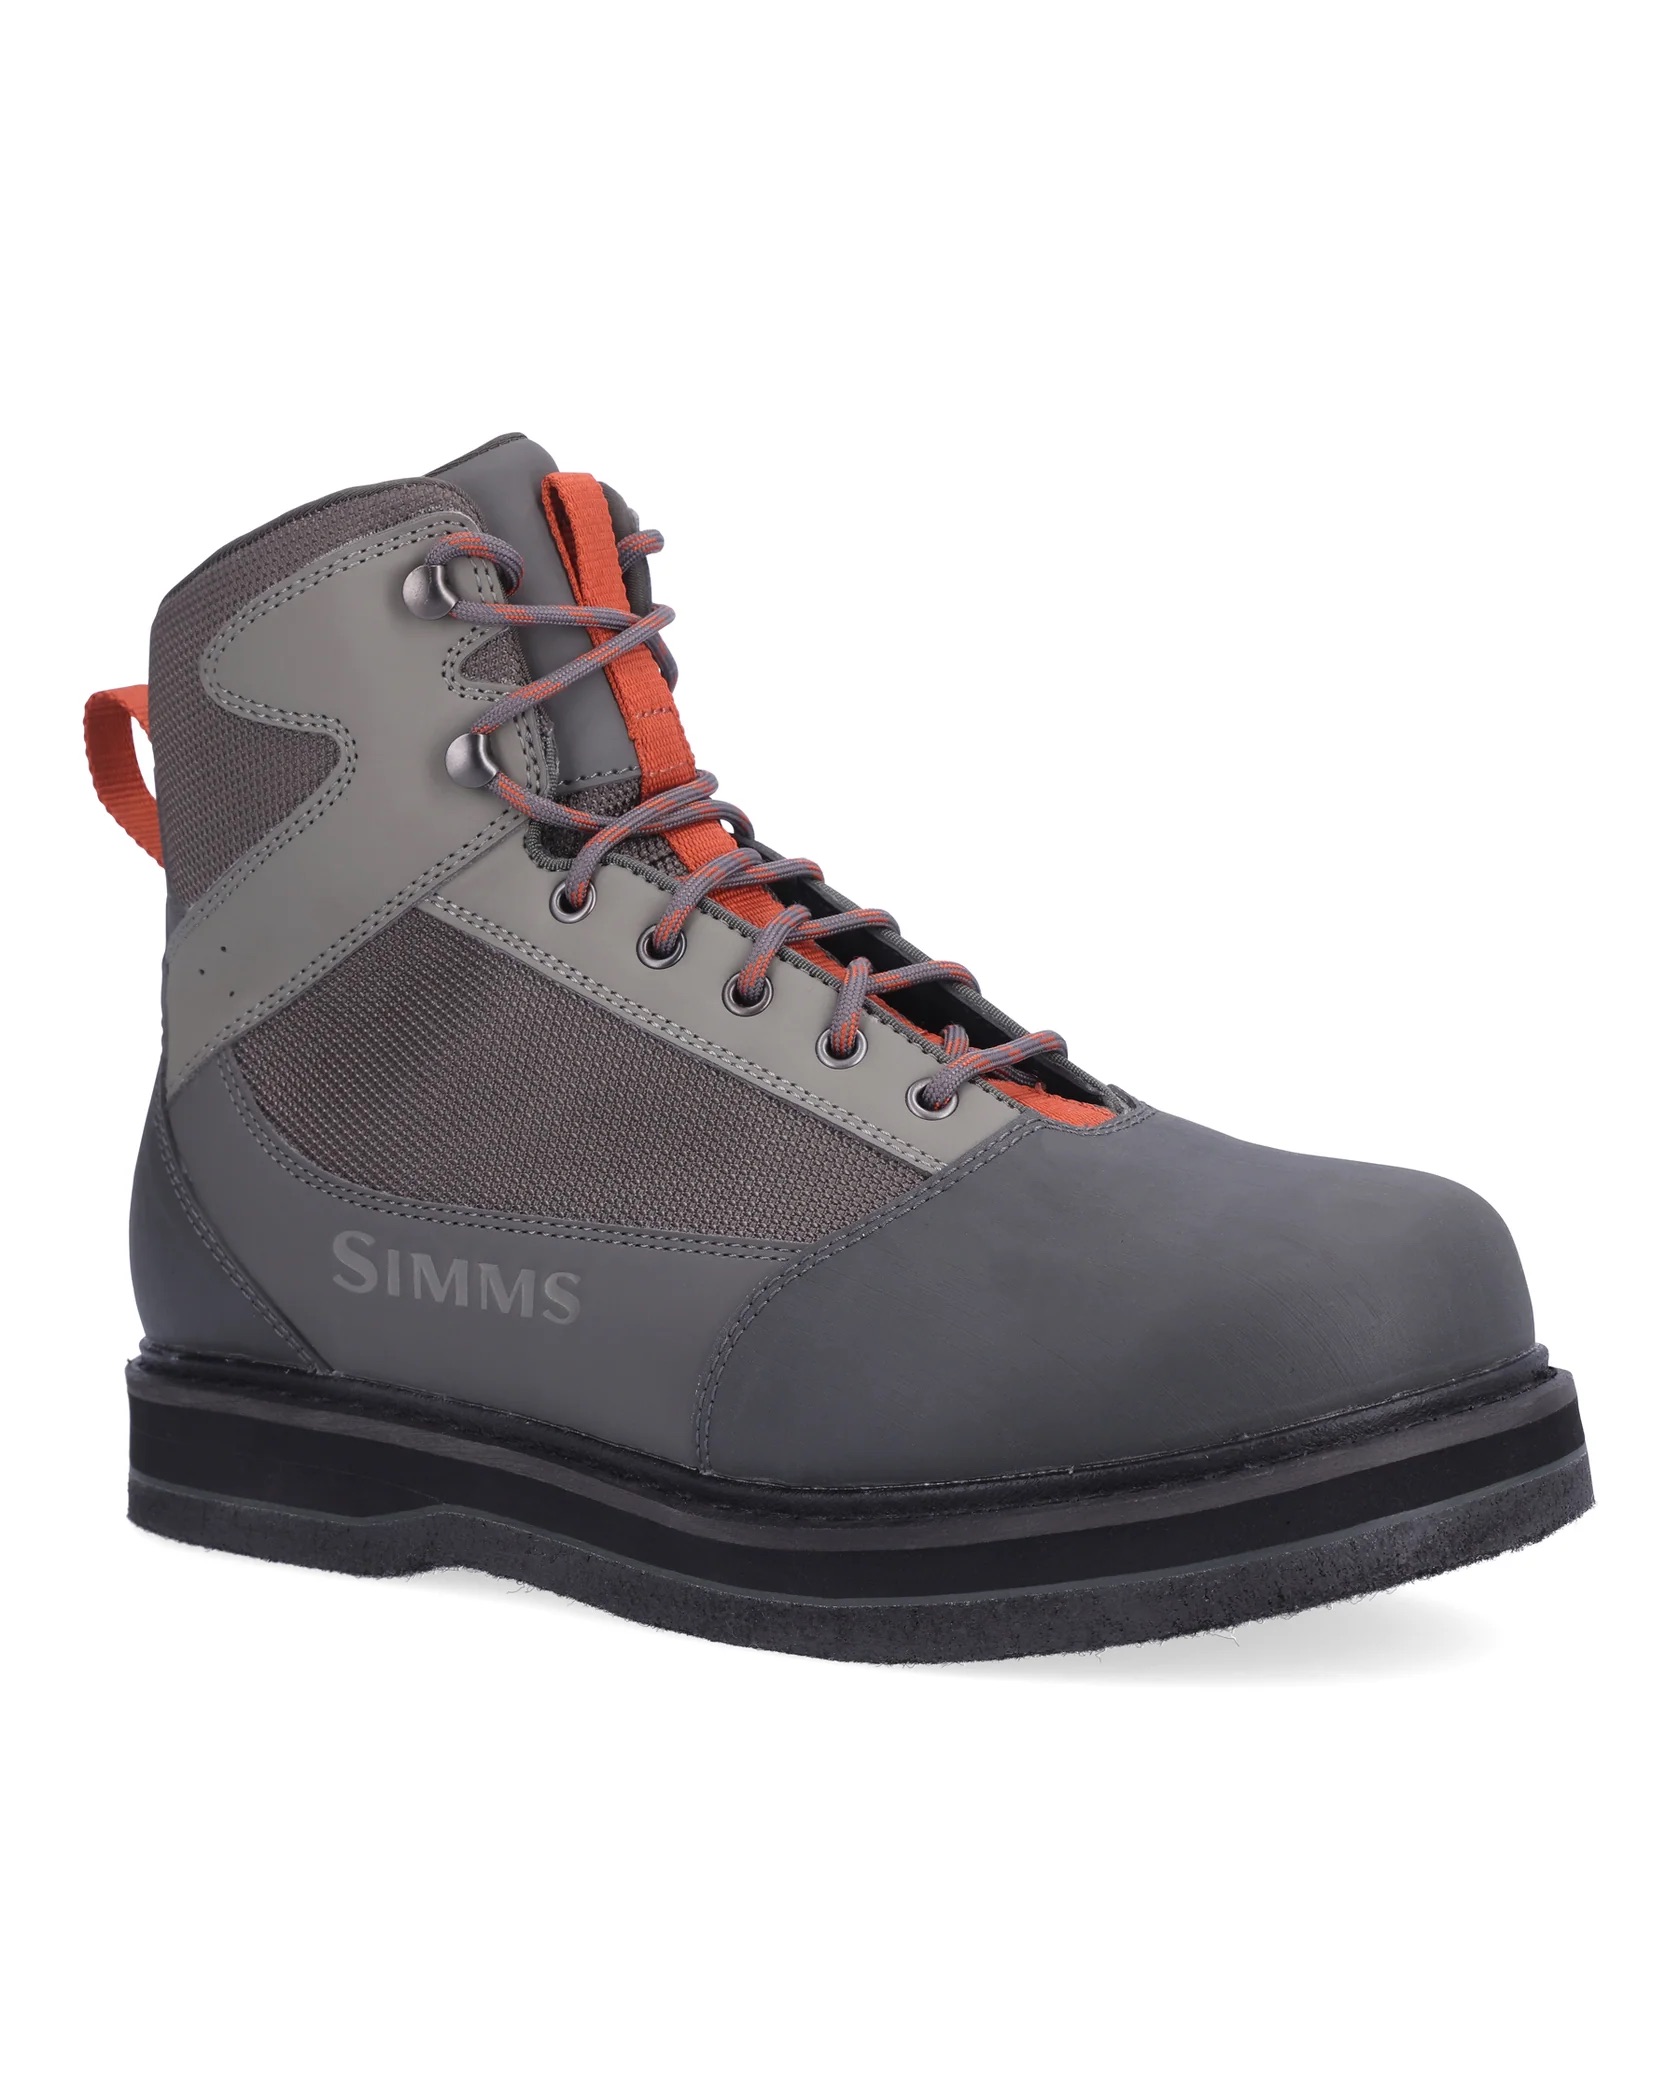 Simms Tributary Wading Boot - Felt - Size 15